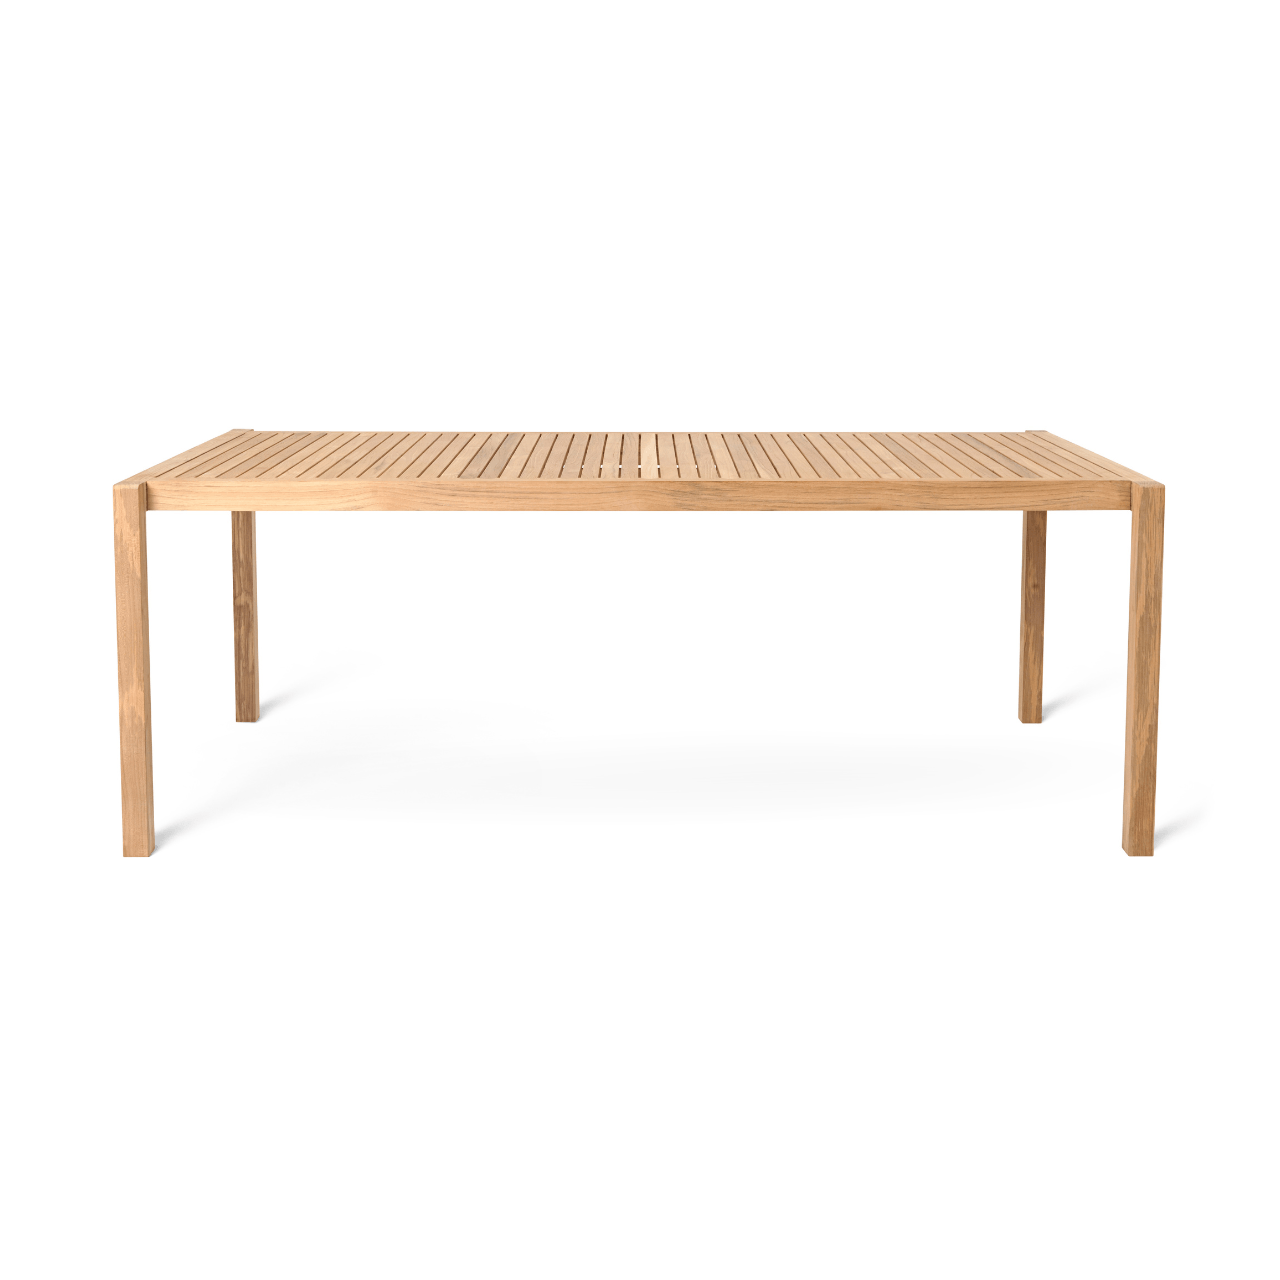 ALFRED Outdoor Dining Table